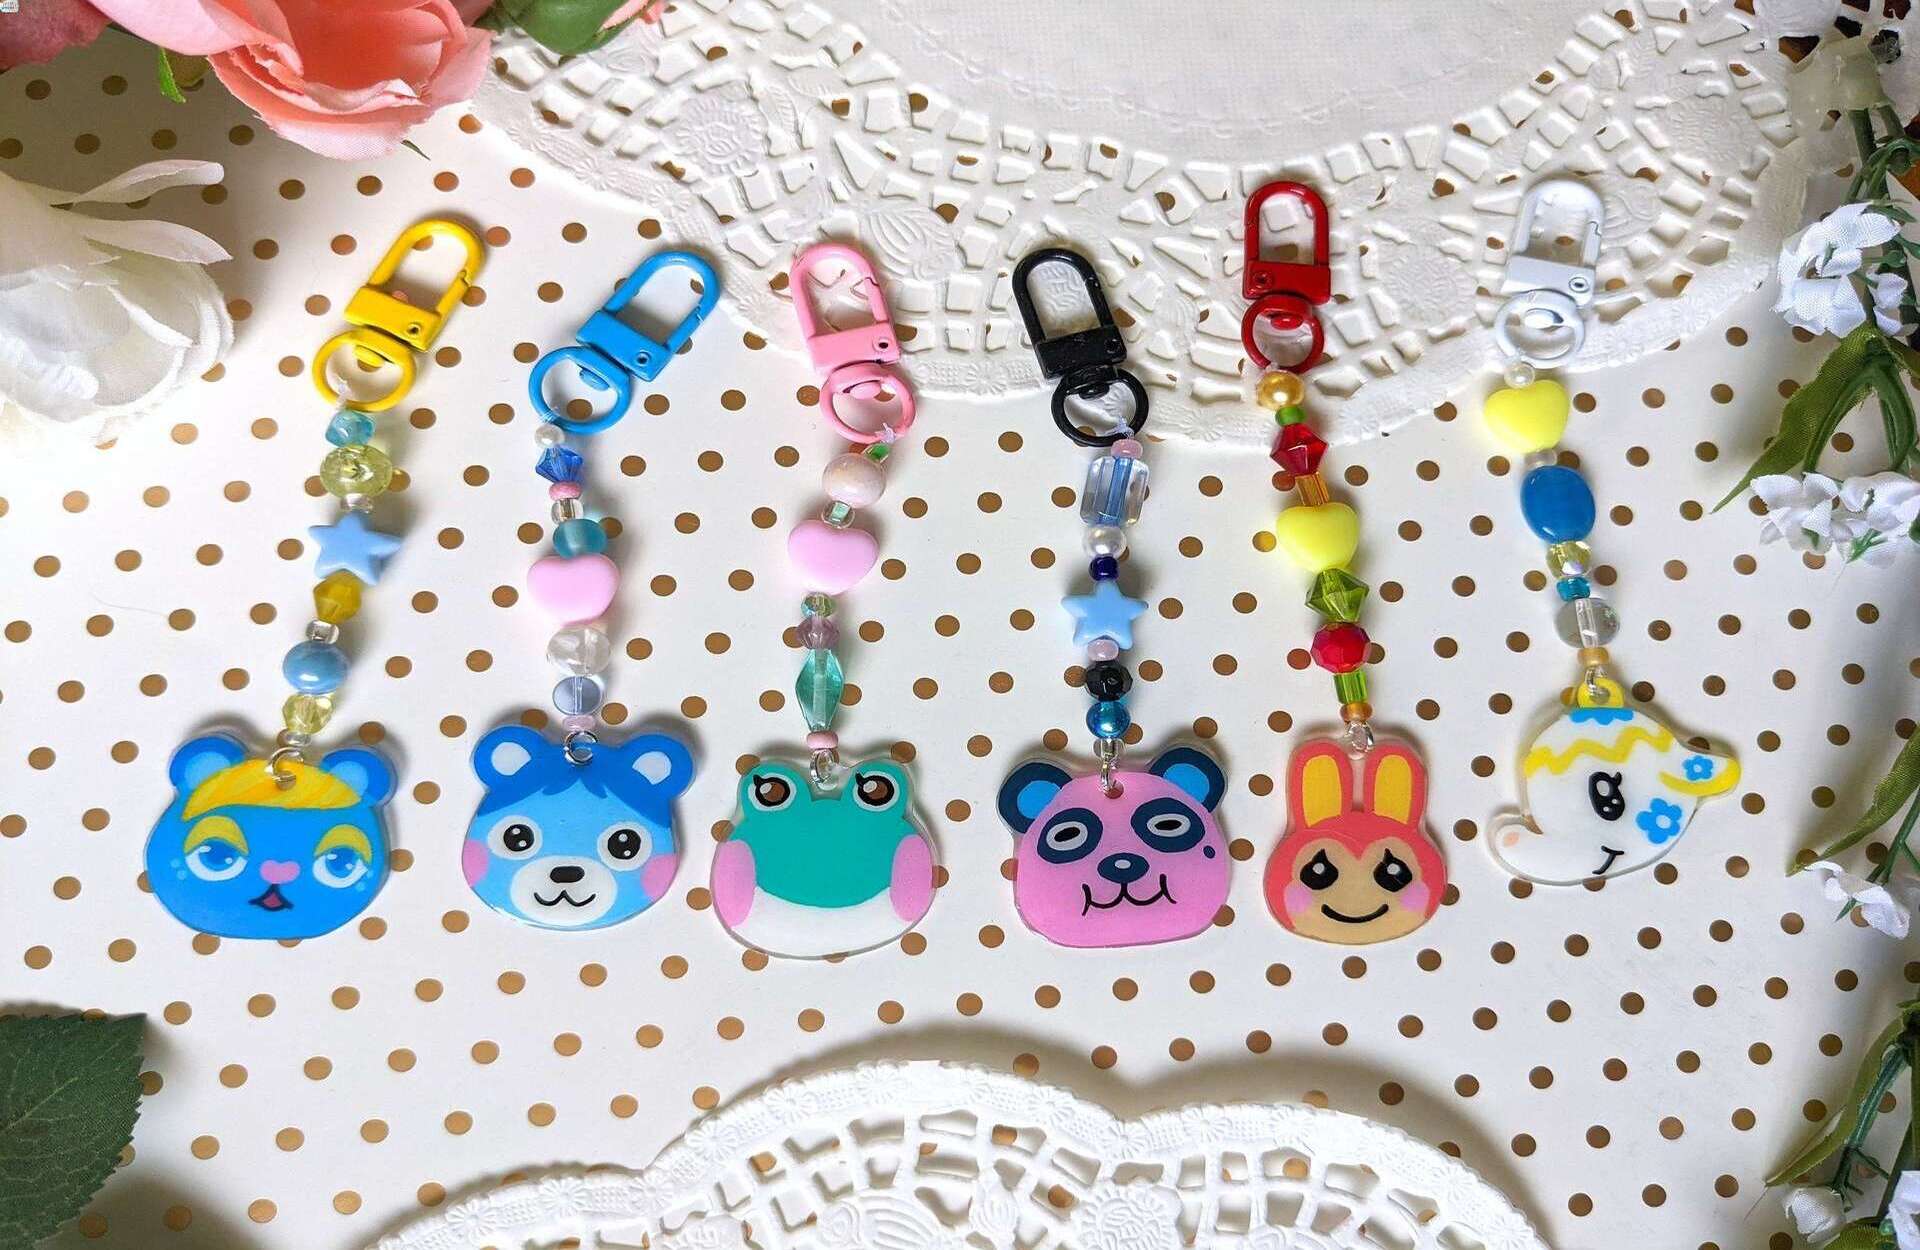 shrinky-dink-craft-crafting-phone-charms-with-shrink-plastic